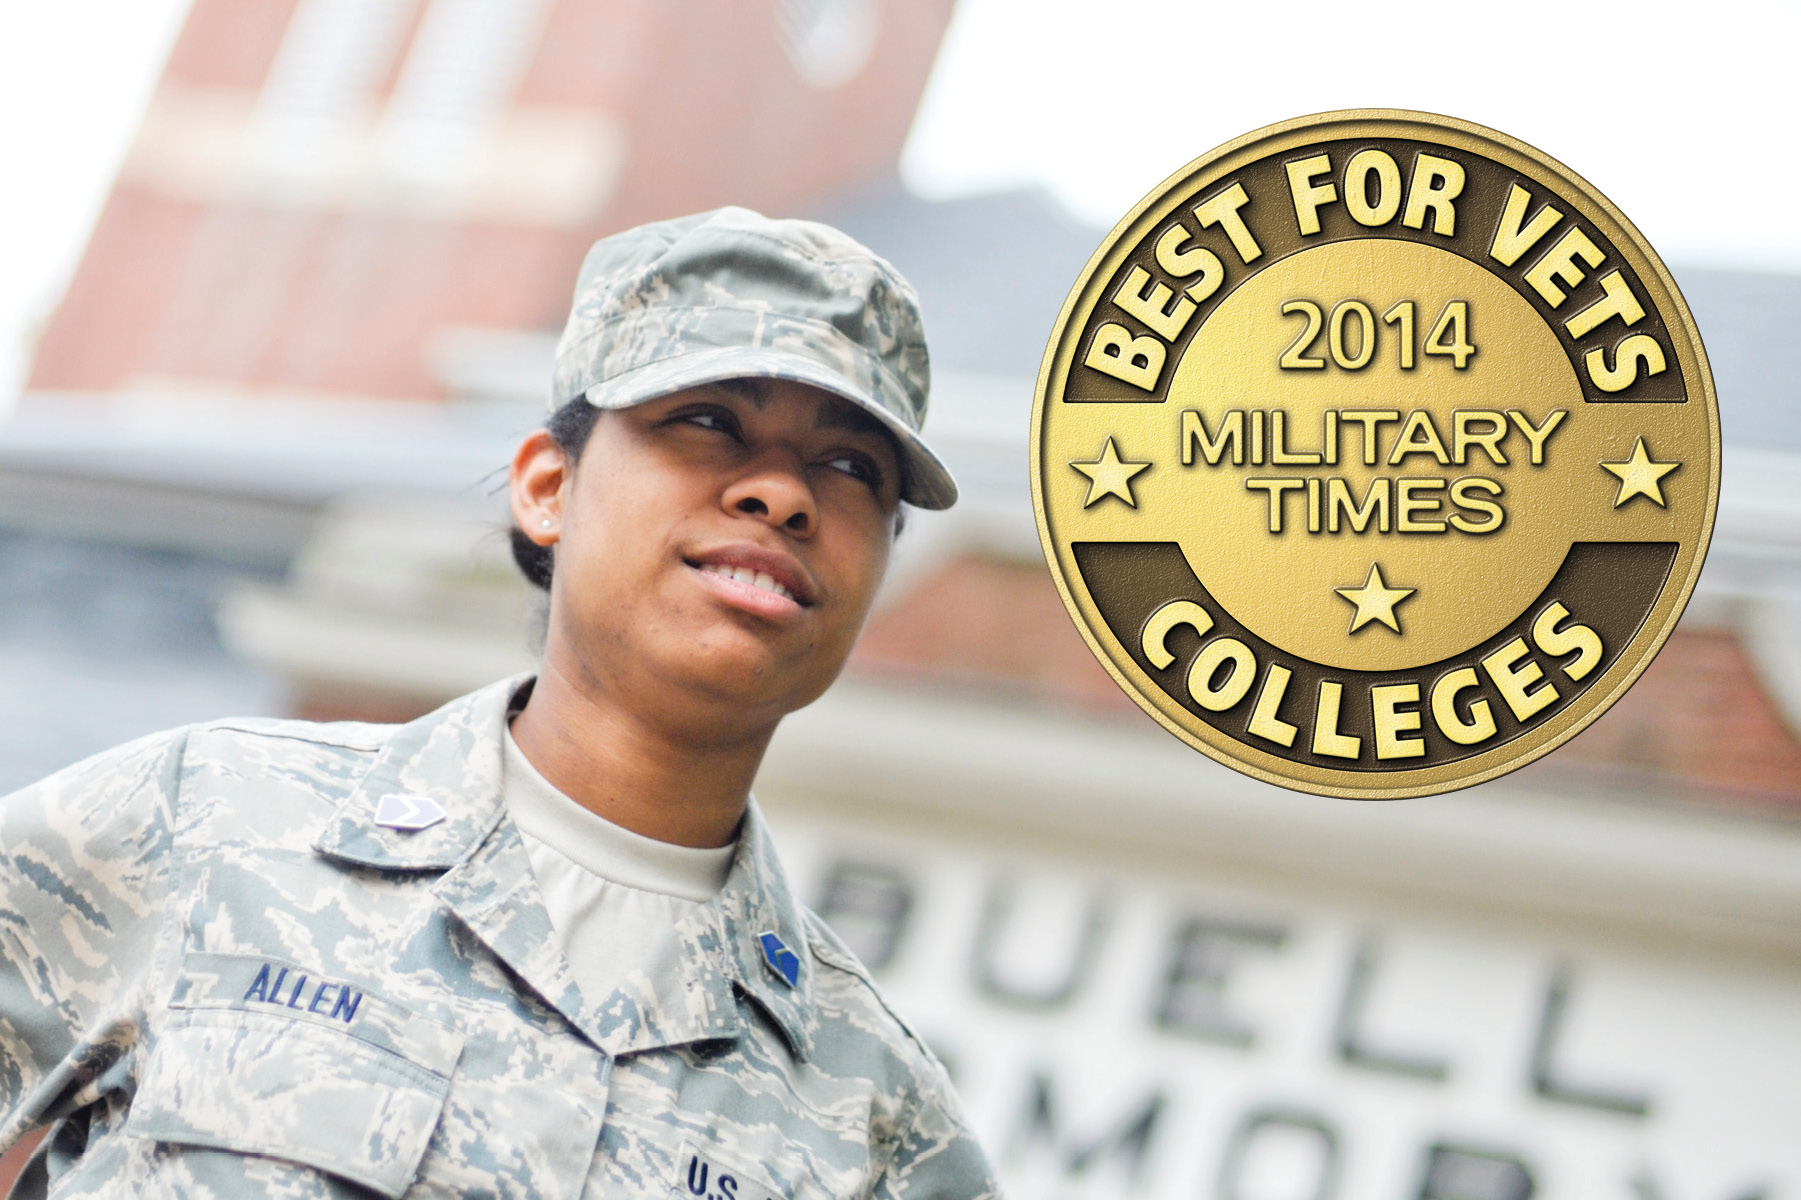 UK has been named a 2014 Best for Vets university